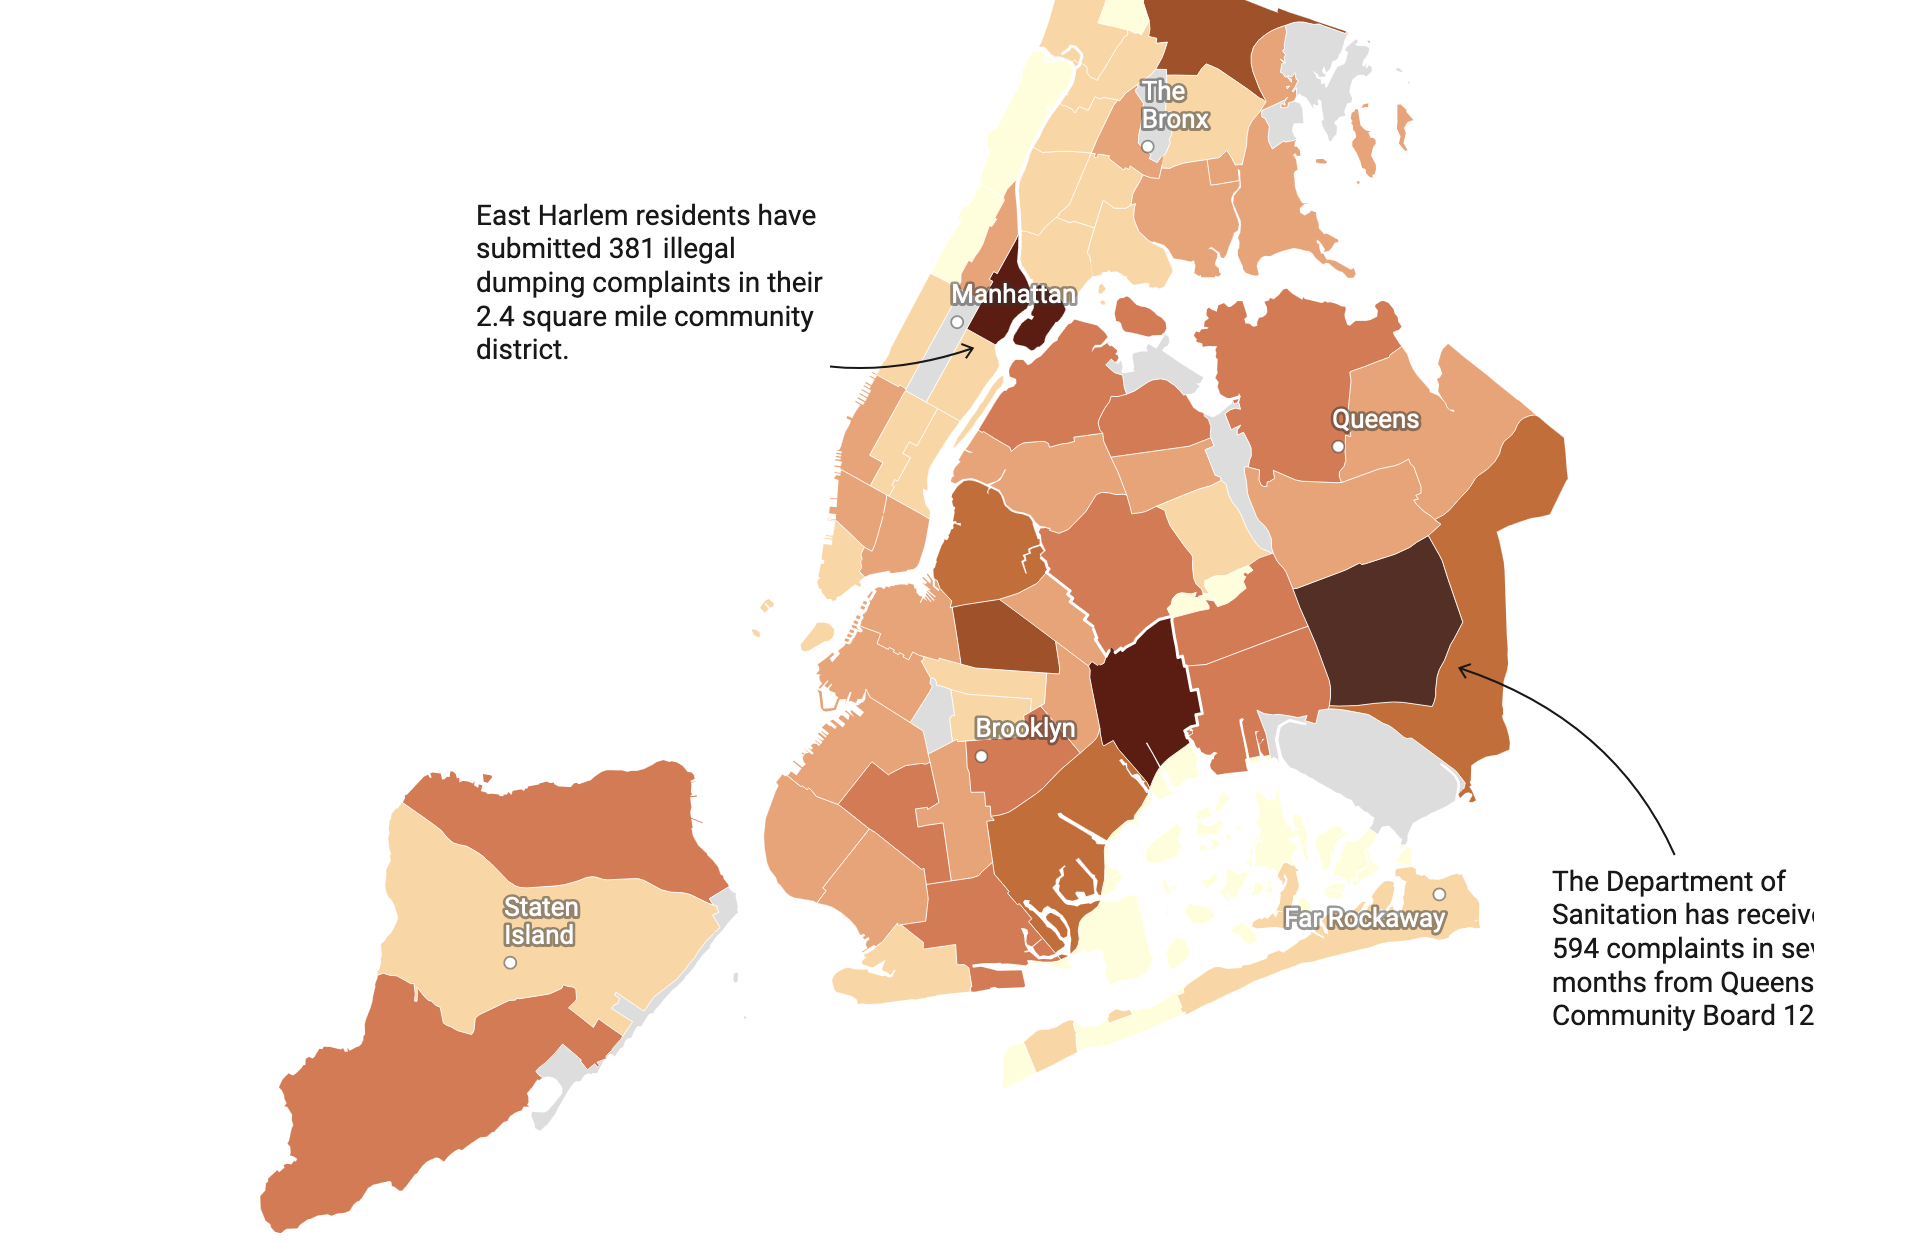 a choropleth map of New York City showing number of illegal dumping complaints to 311. The darkest concentrations are in East Harlem, Jamaica, East New York and Ozone Park.